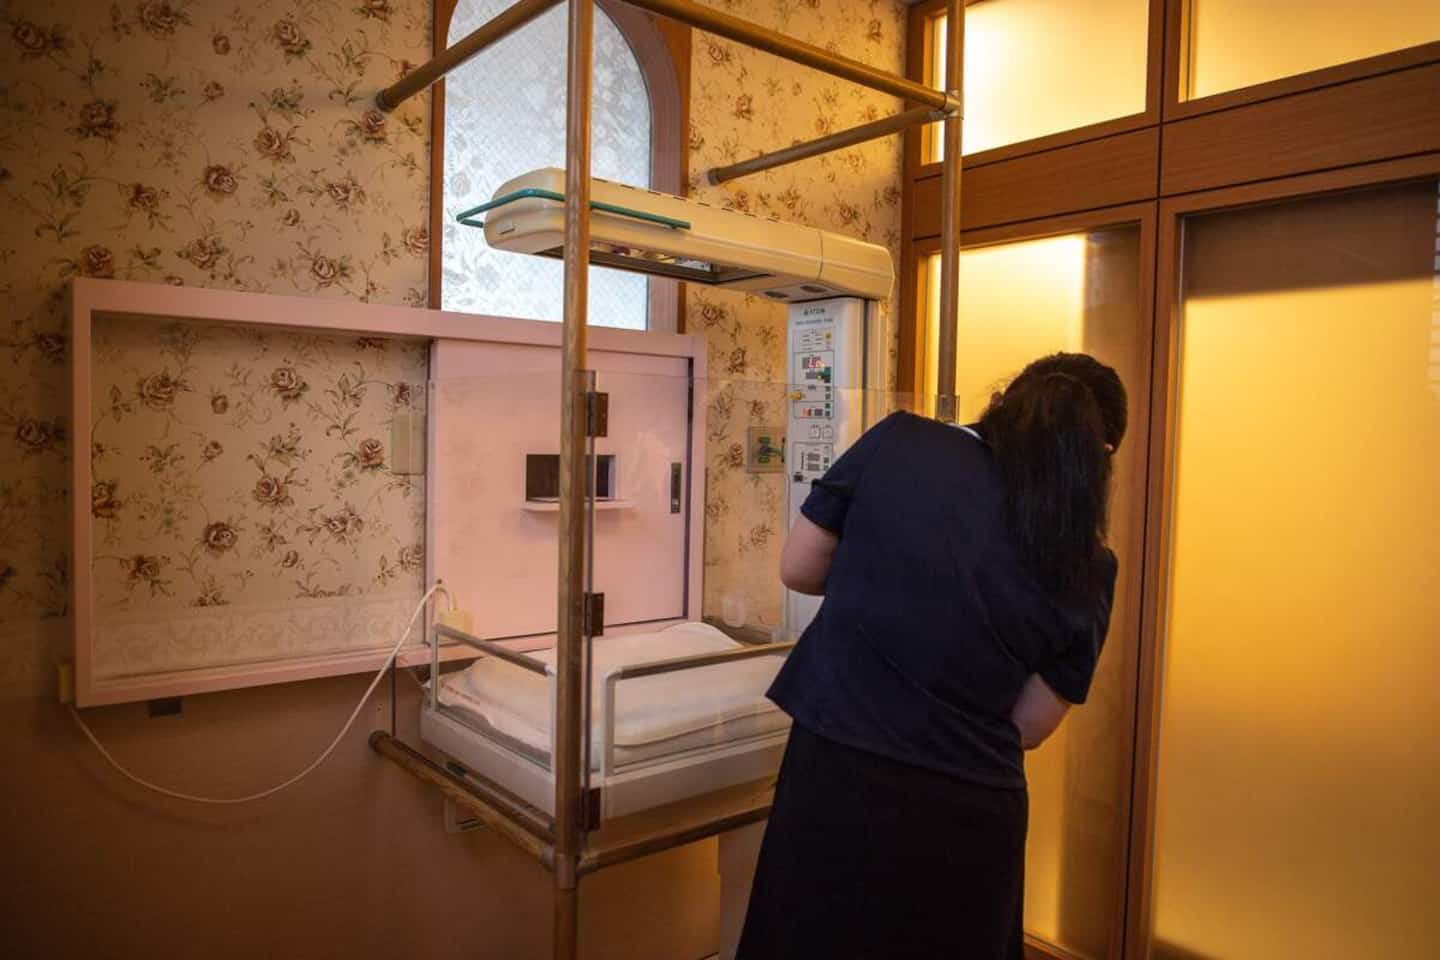 [PHOTOS] In Japan, a "baby box" to abandon your child disputed